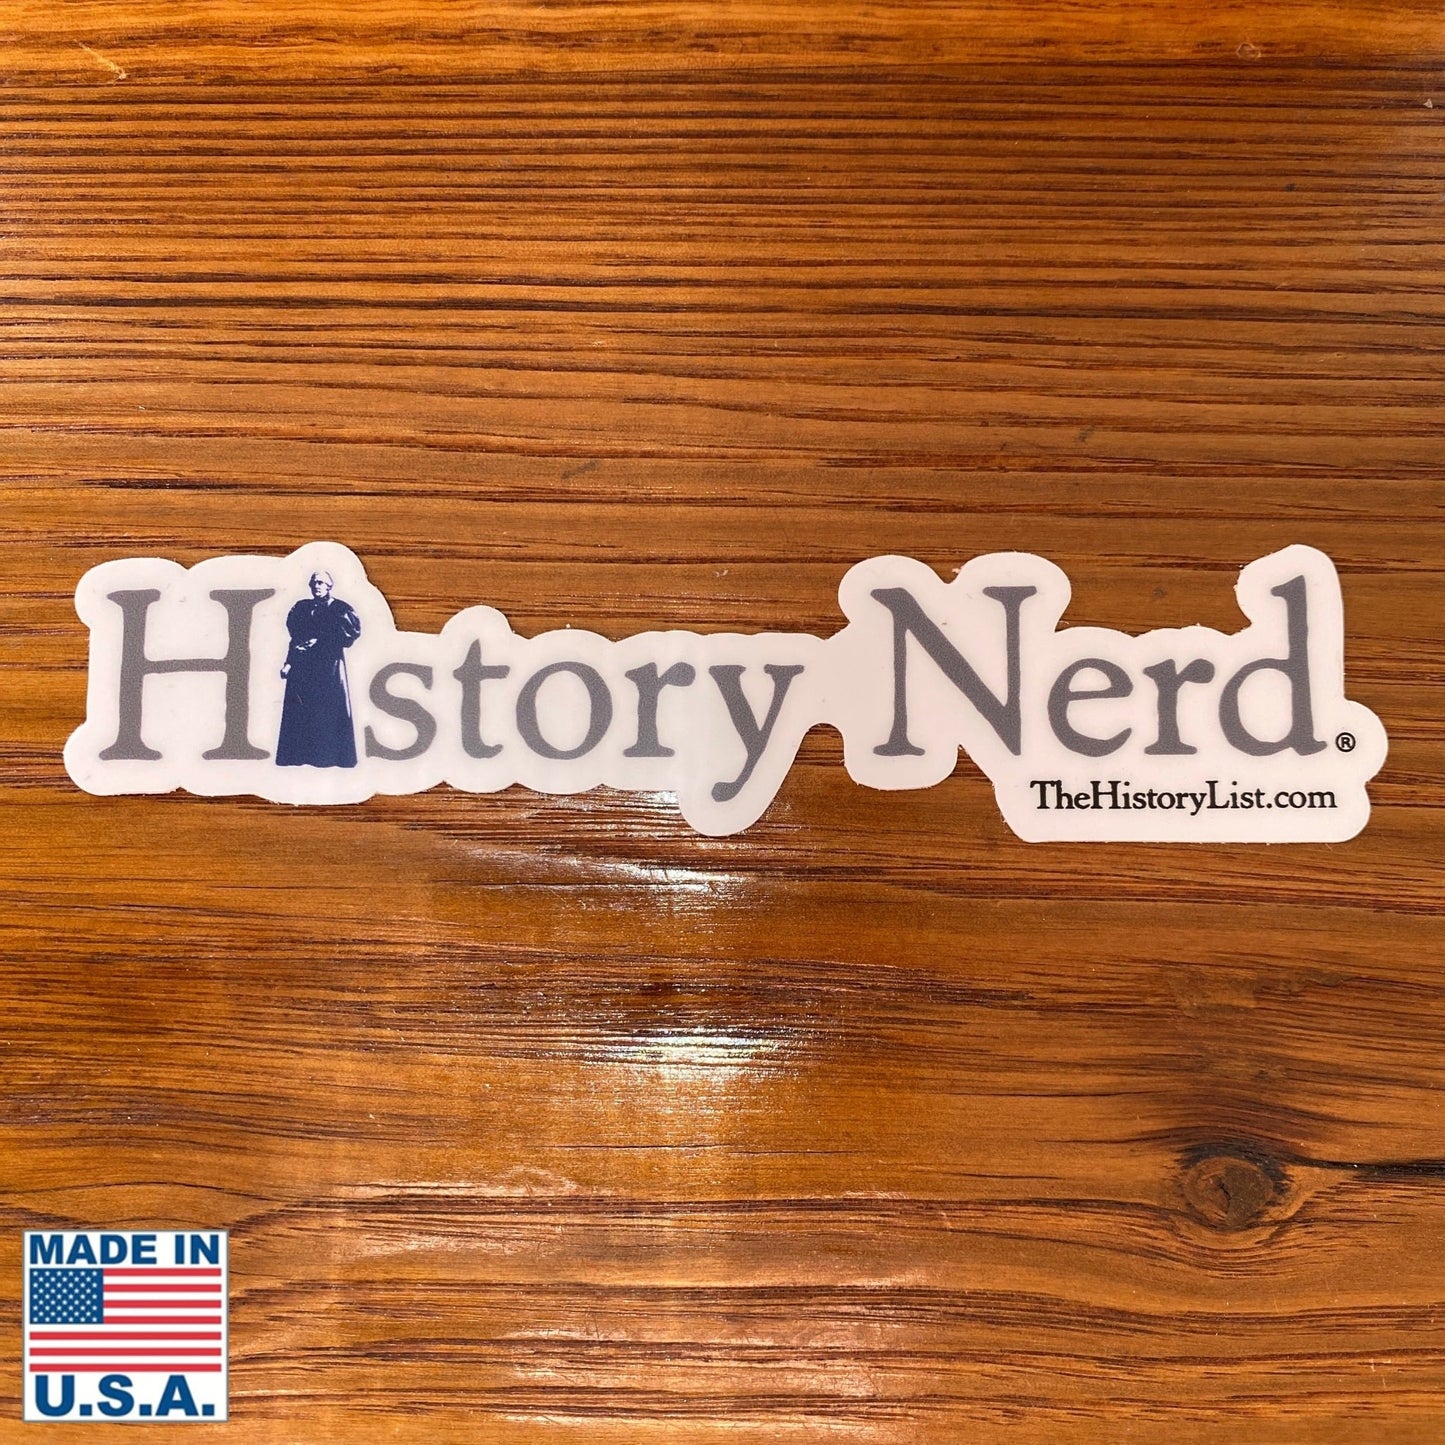 "History Nerd" sticker with Susan B. Anthony from the History List Store